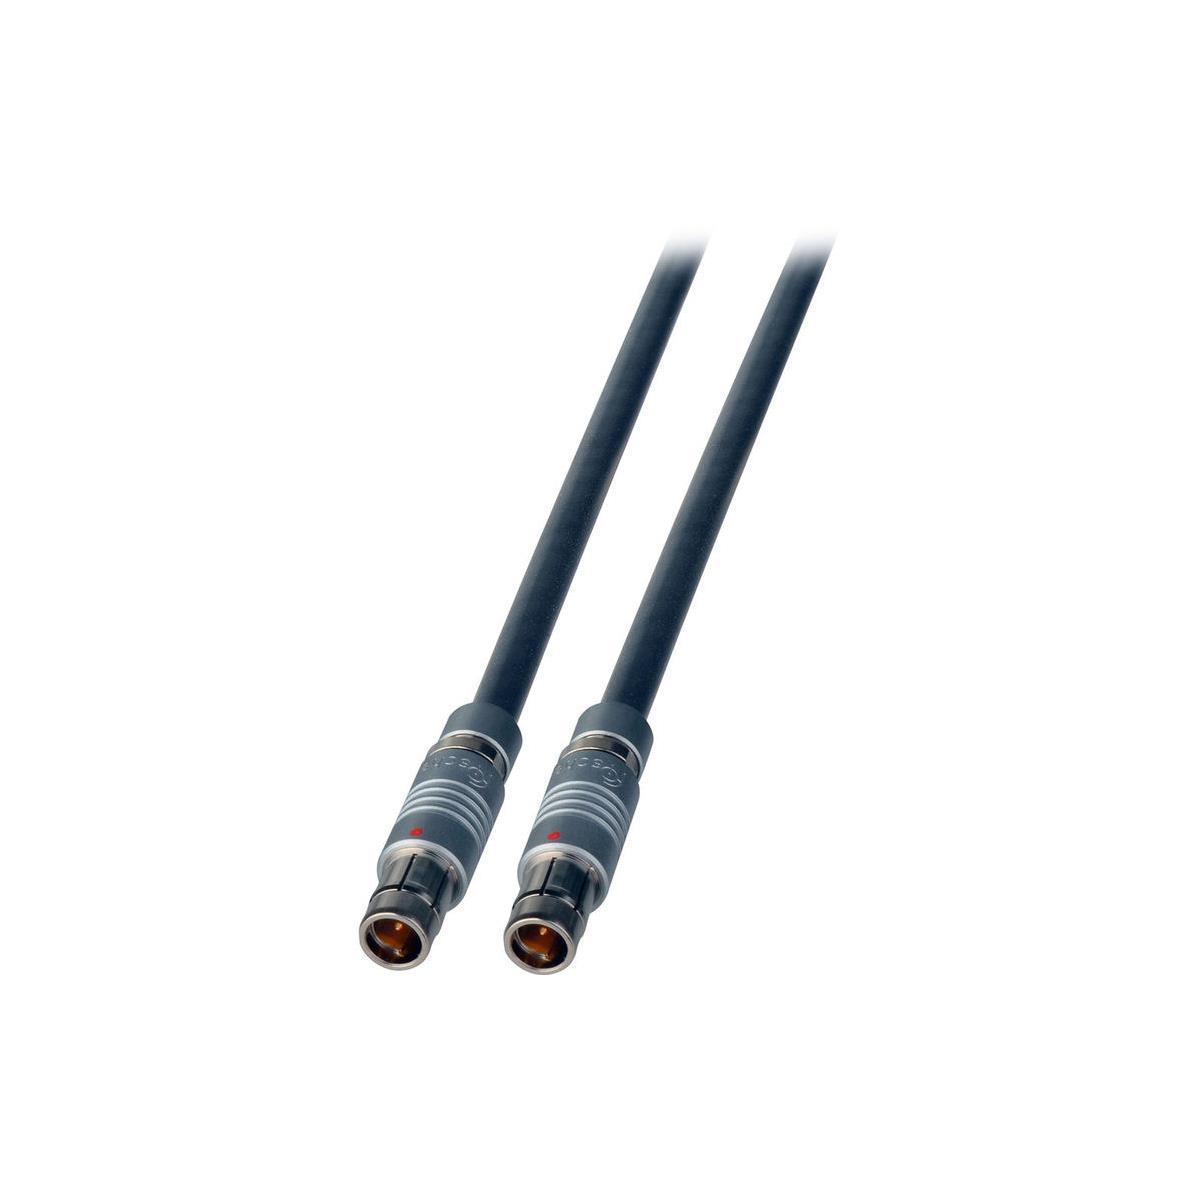 Image of Laird 1' 3-Pin Fischer to 3-Pin Fischer 24V DC Power Cable